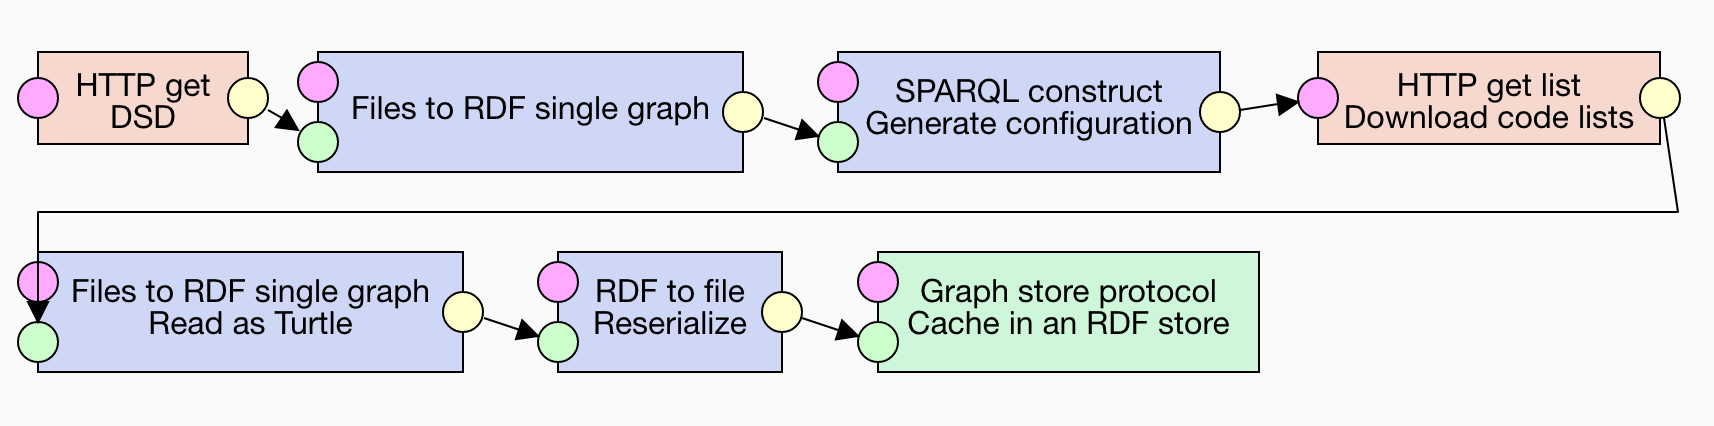 Pipeline for caching code lists